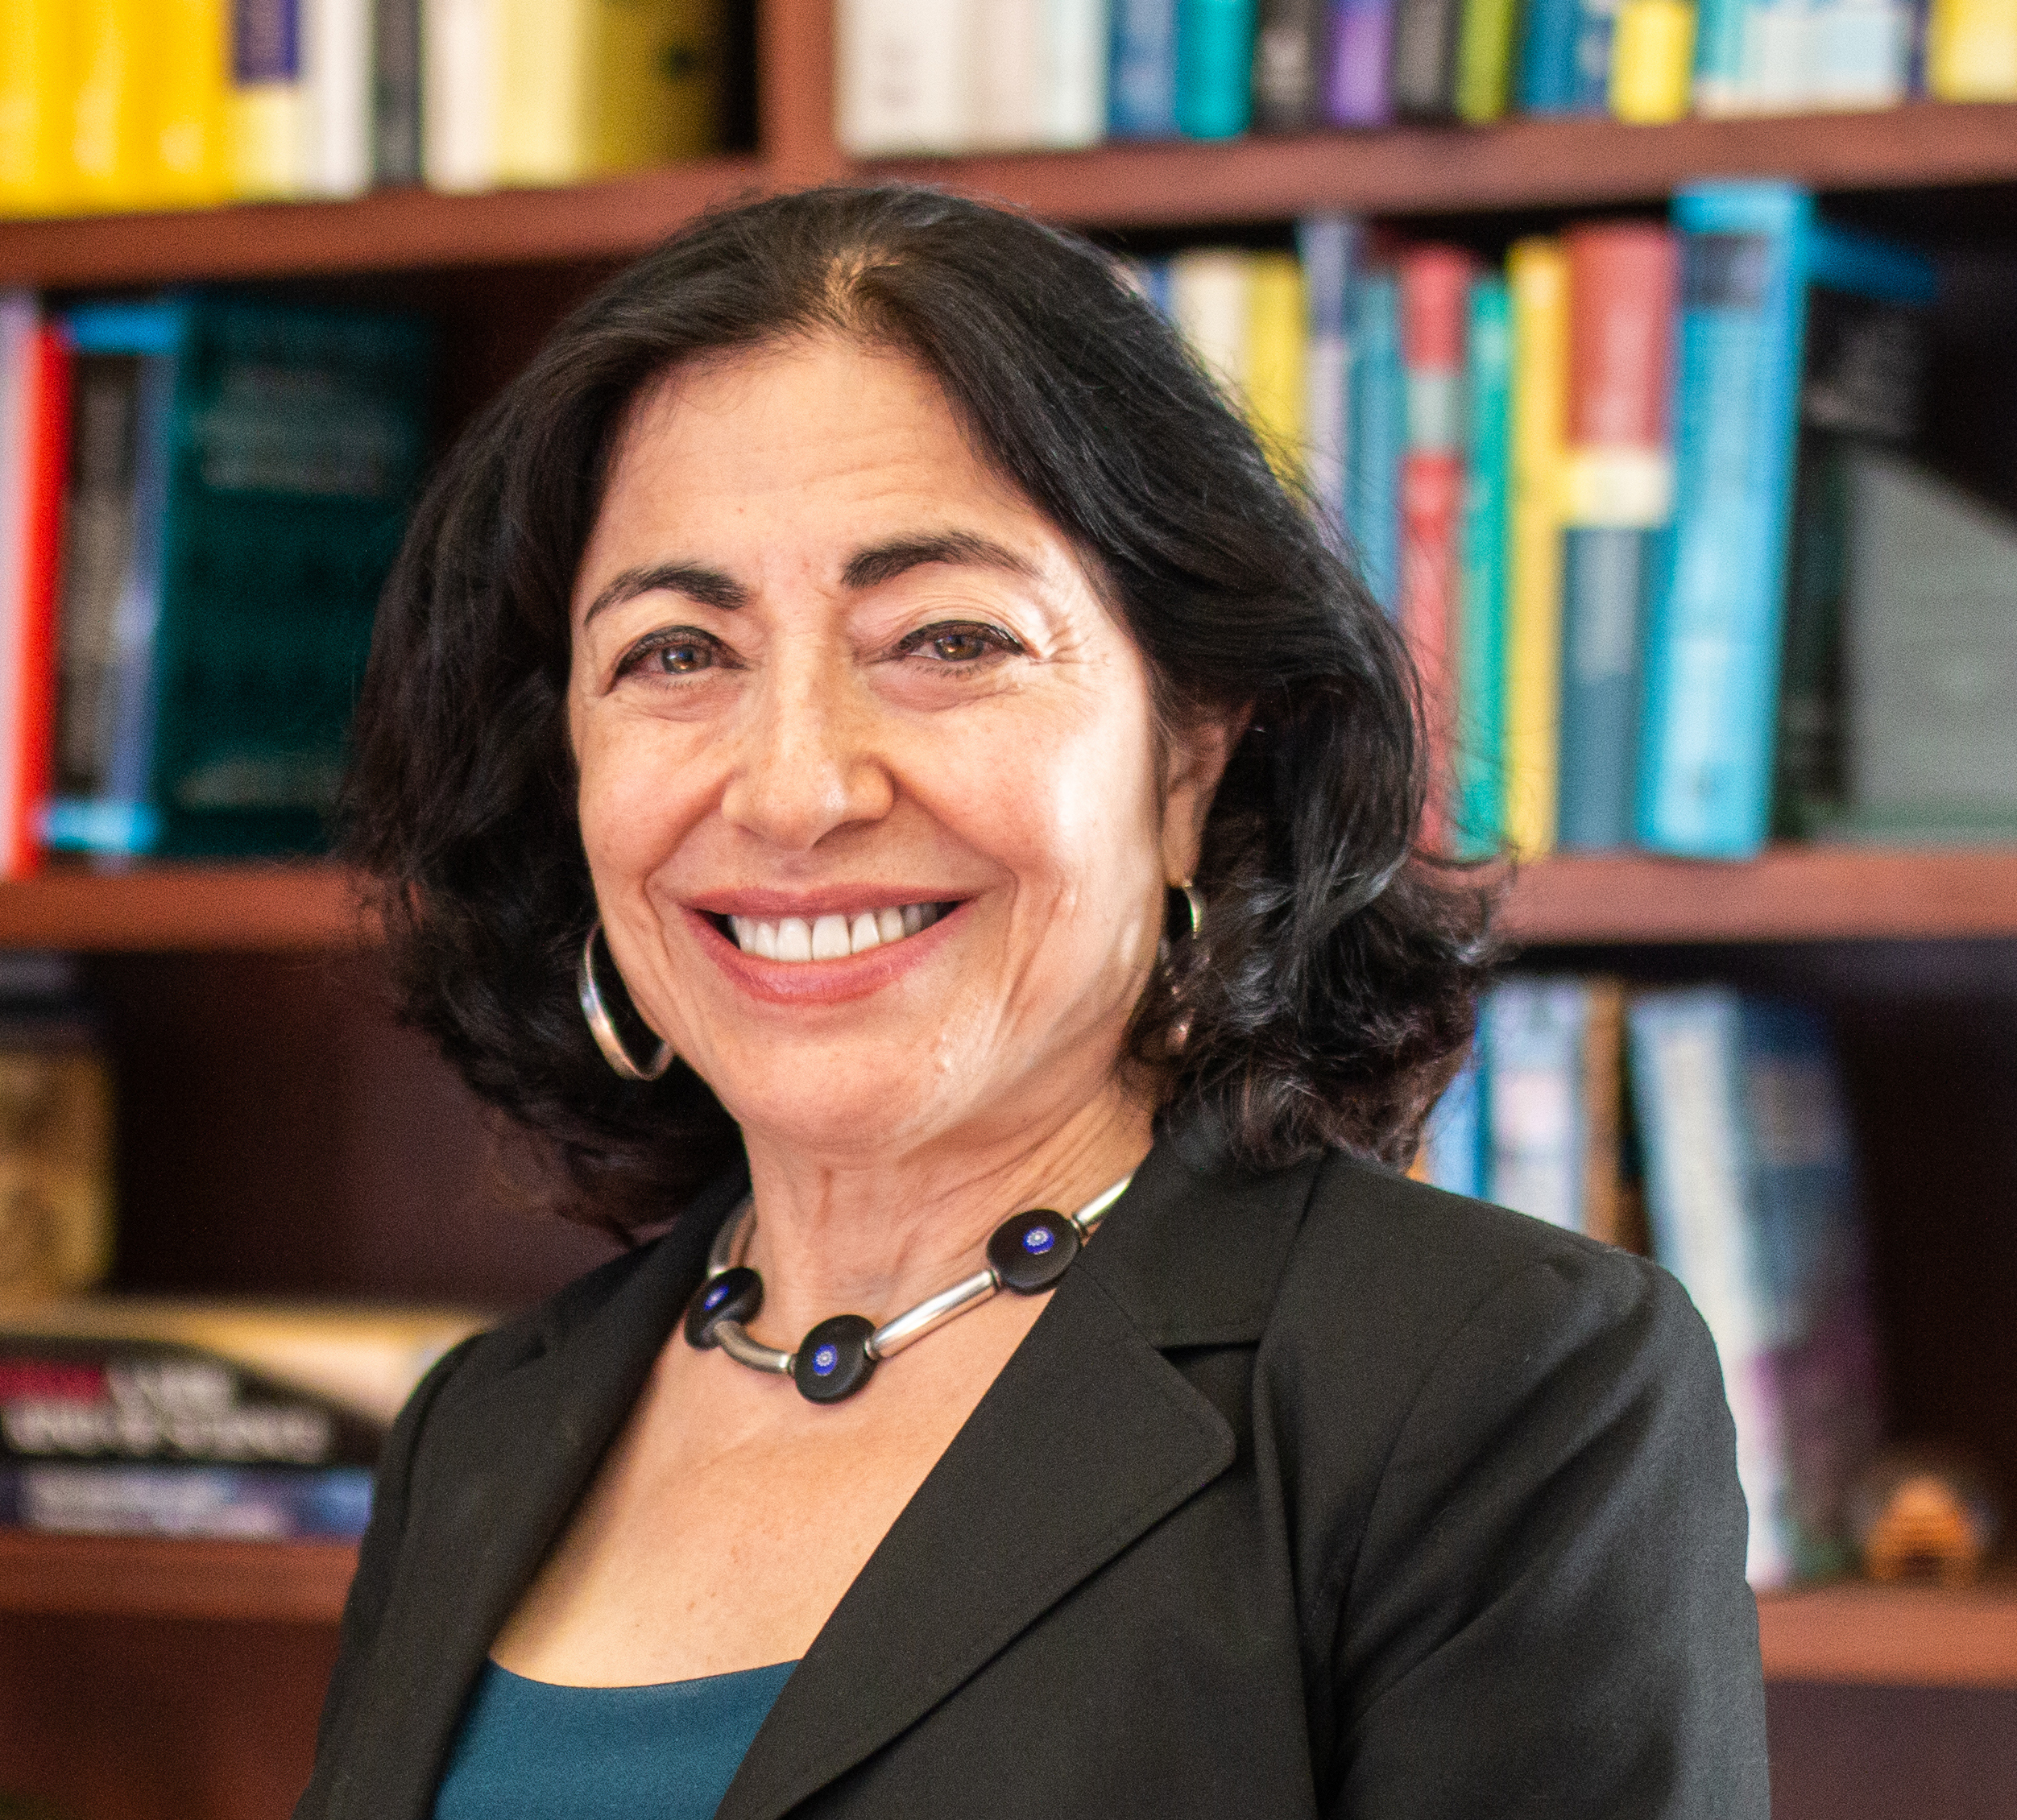 Portrait of Dean Jennifer Chayes wearing a black suit and teal dress, facing the camera and standing in front of a bookshelf